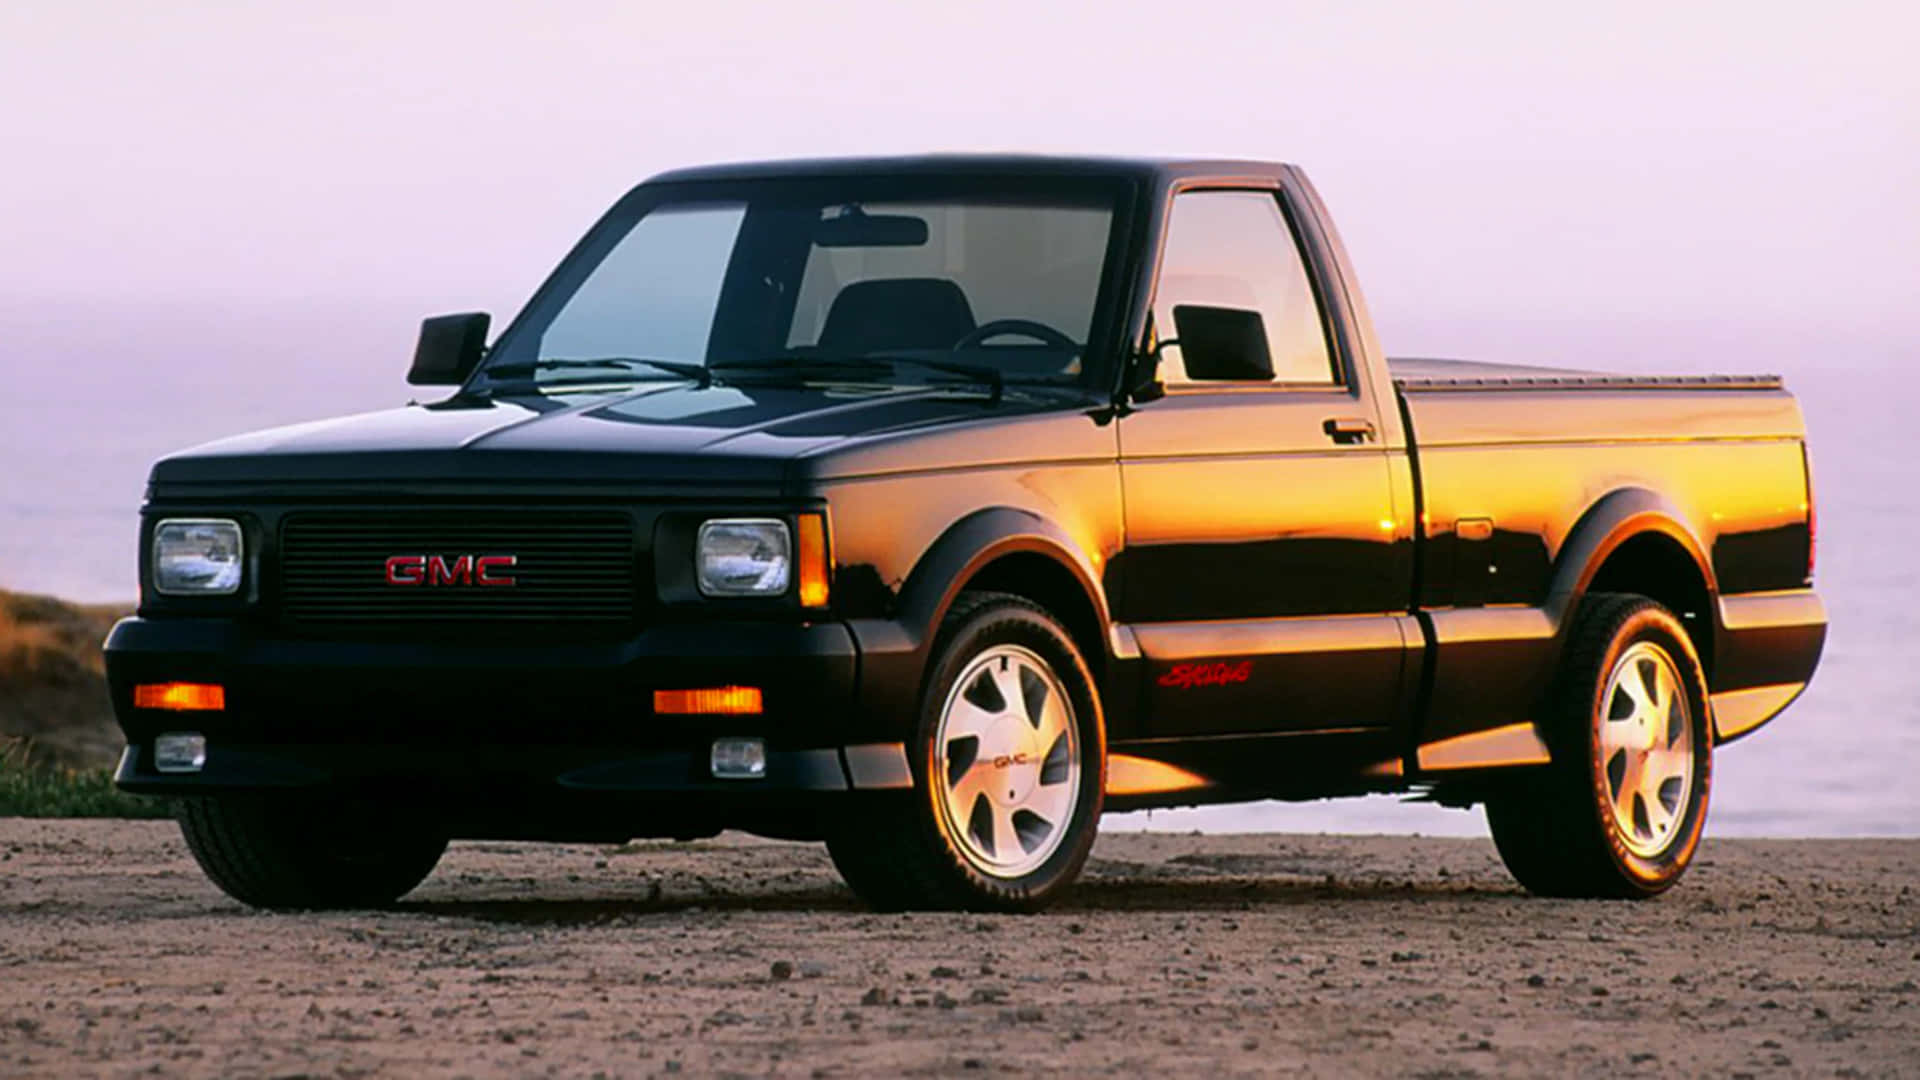 Stunning GMC Syclone in Action Wallpaper